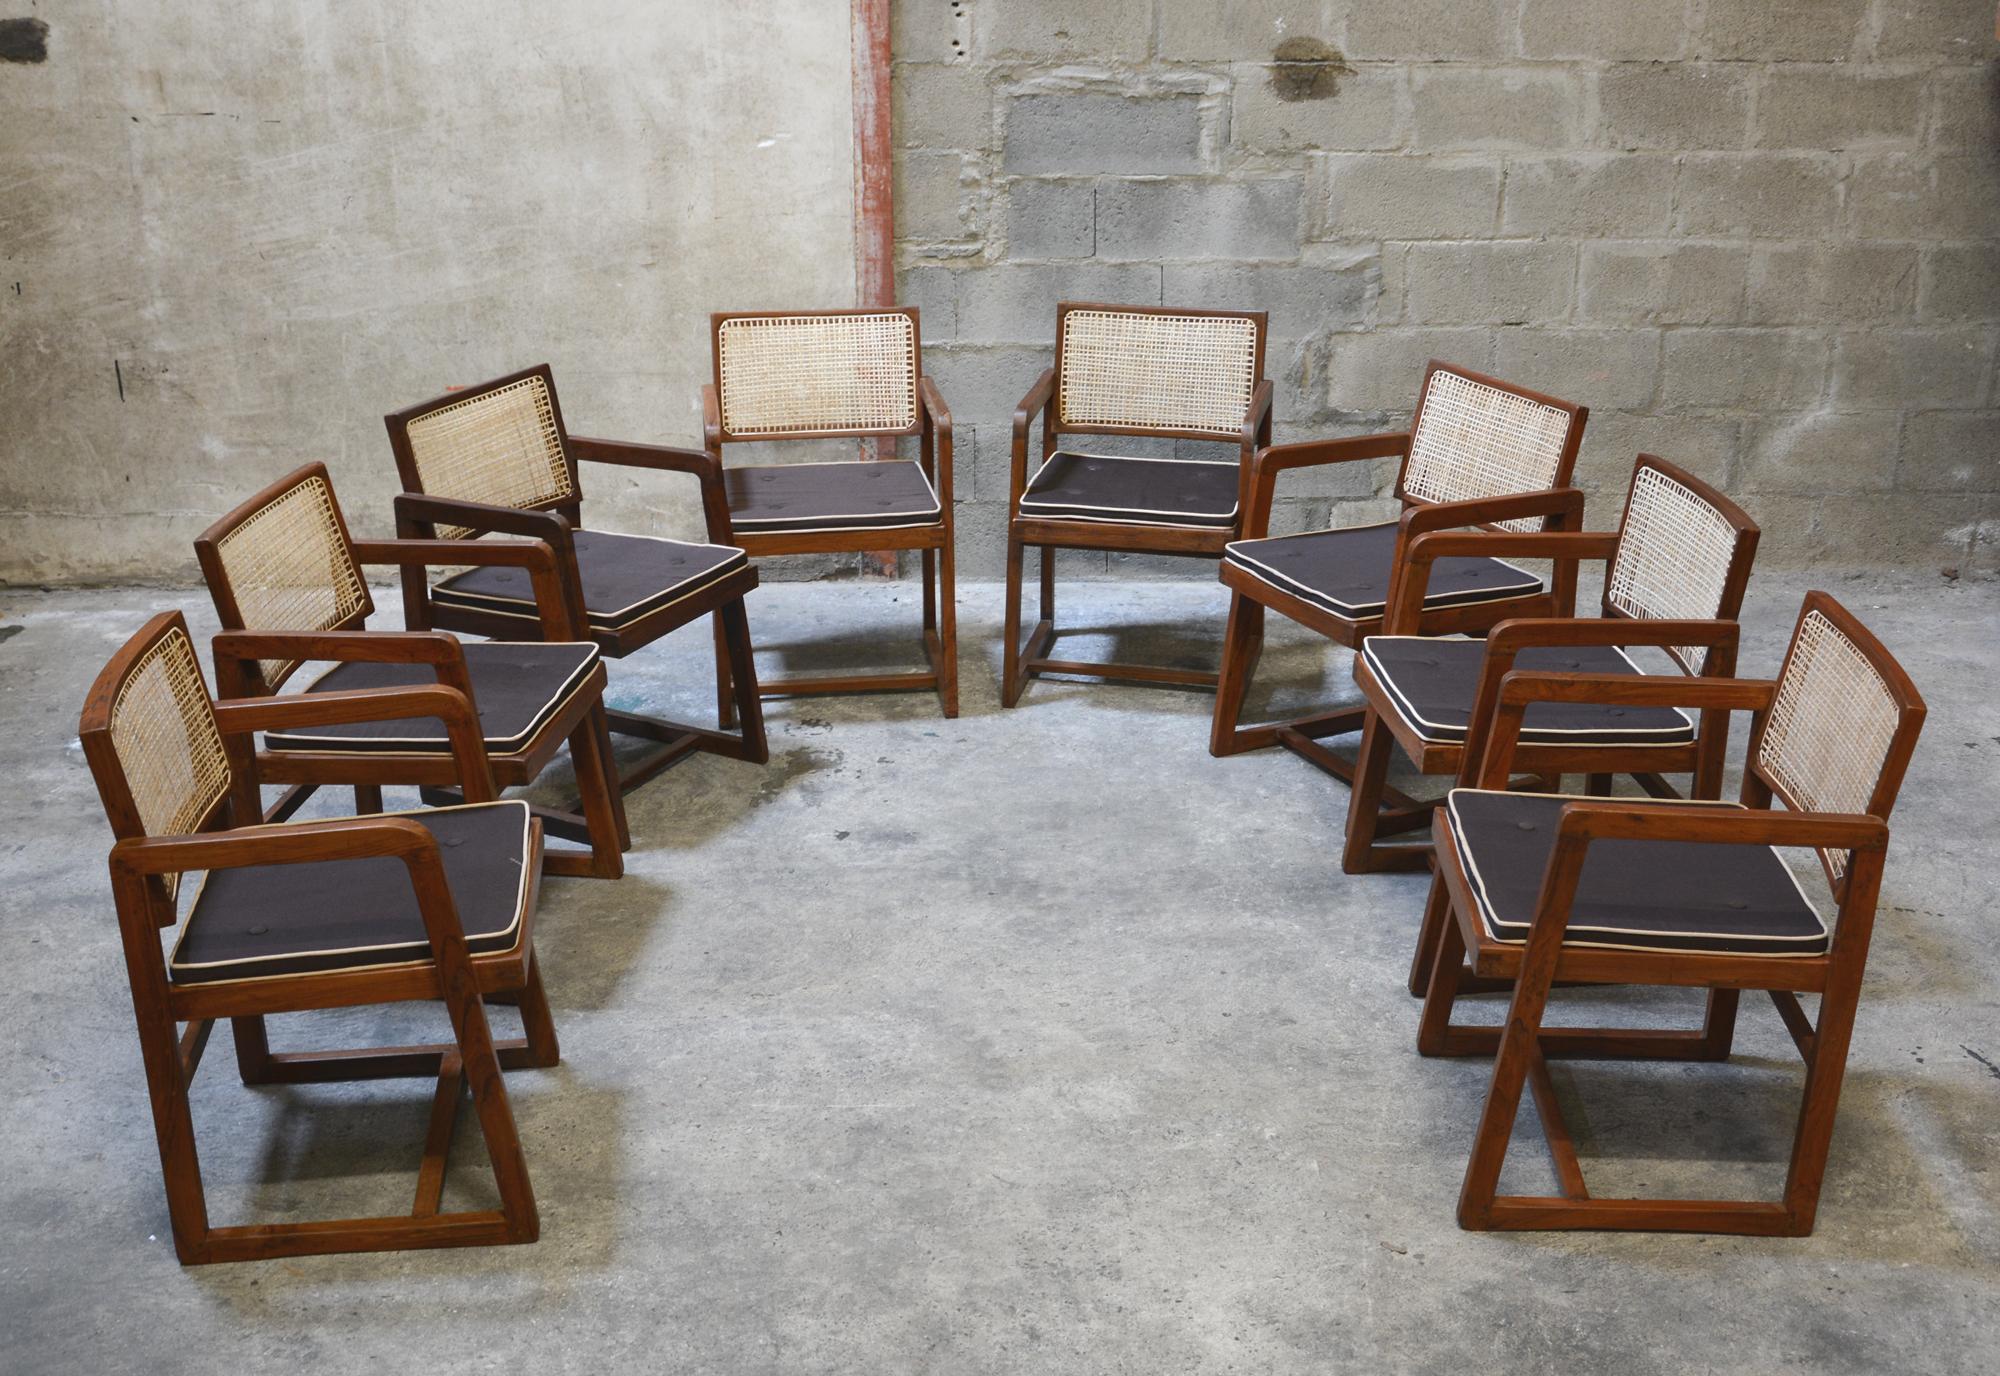 Indian Pierre Jeanneret Rare Set of 8 Cane Back Office Chairs with Original Letterings For Sale